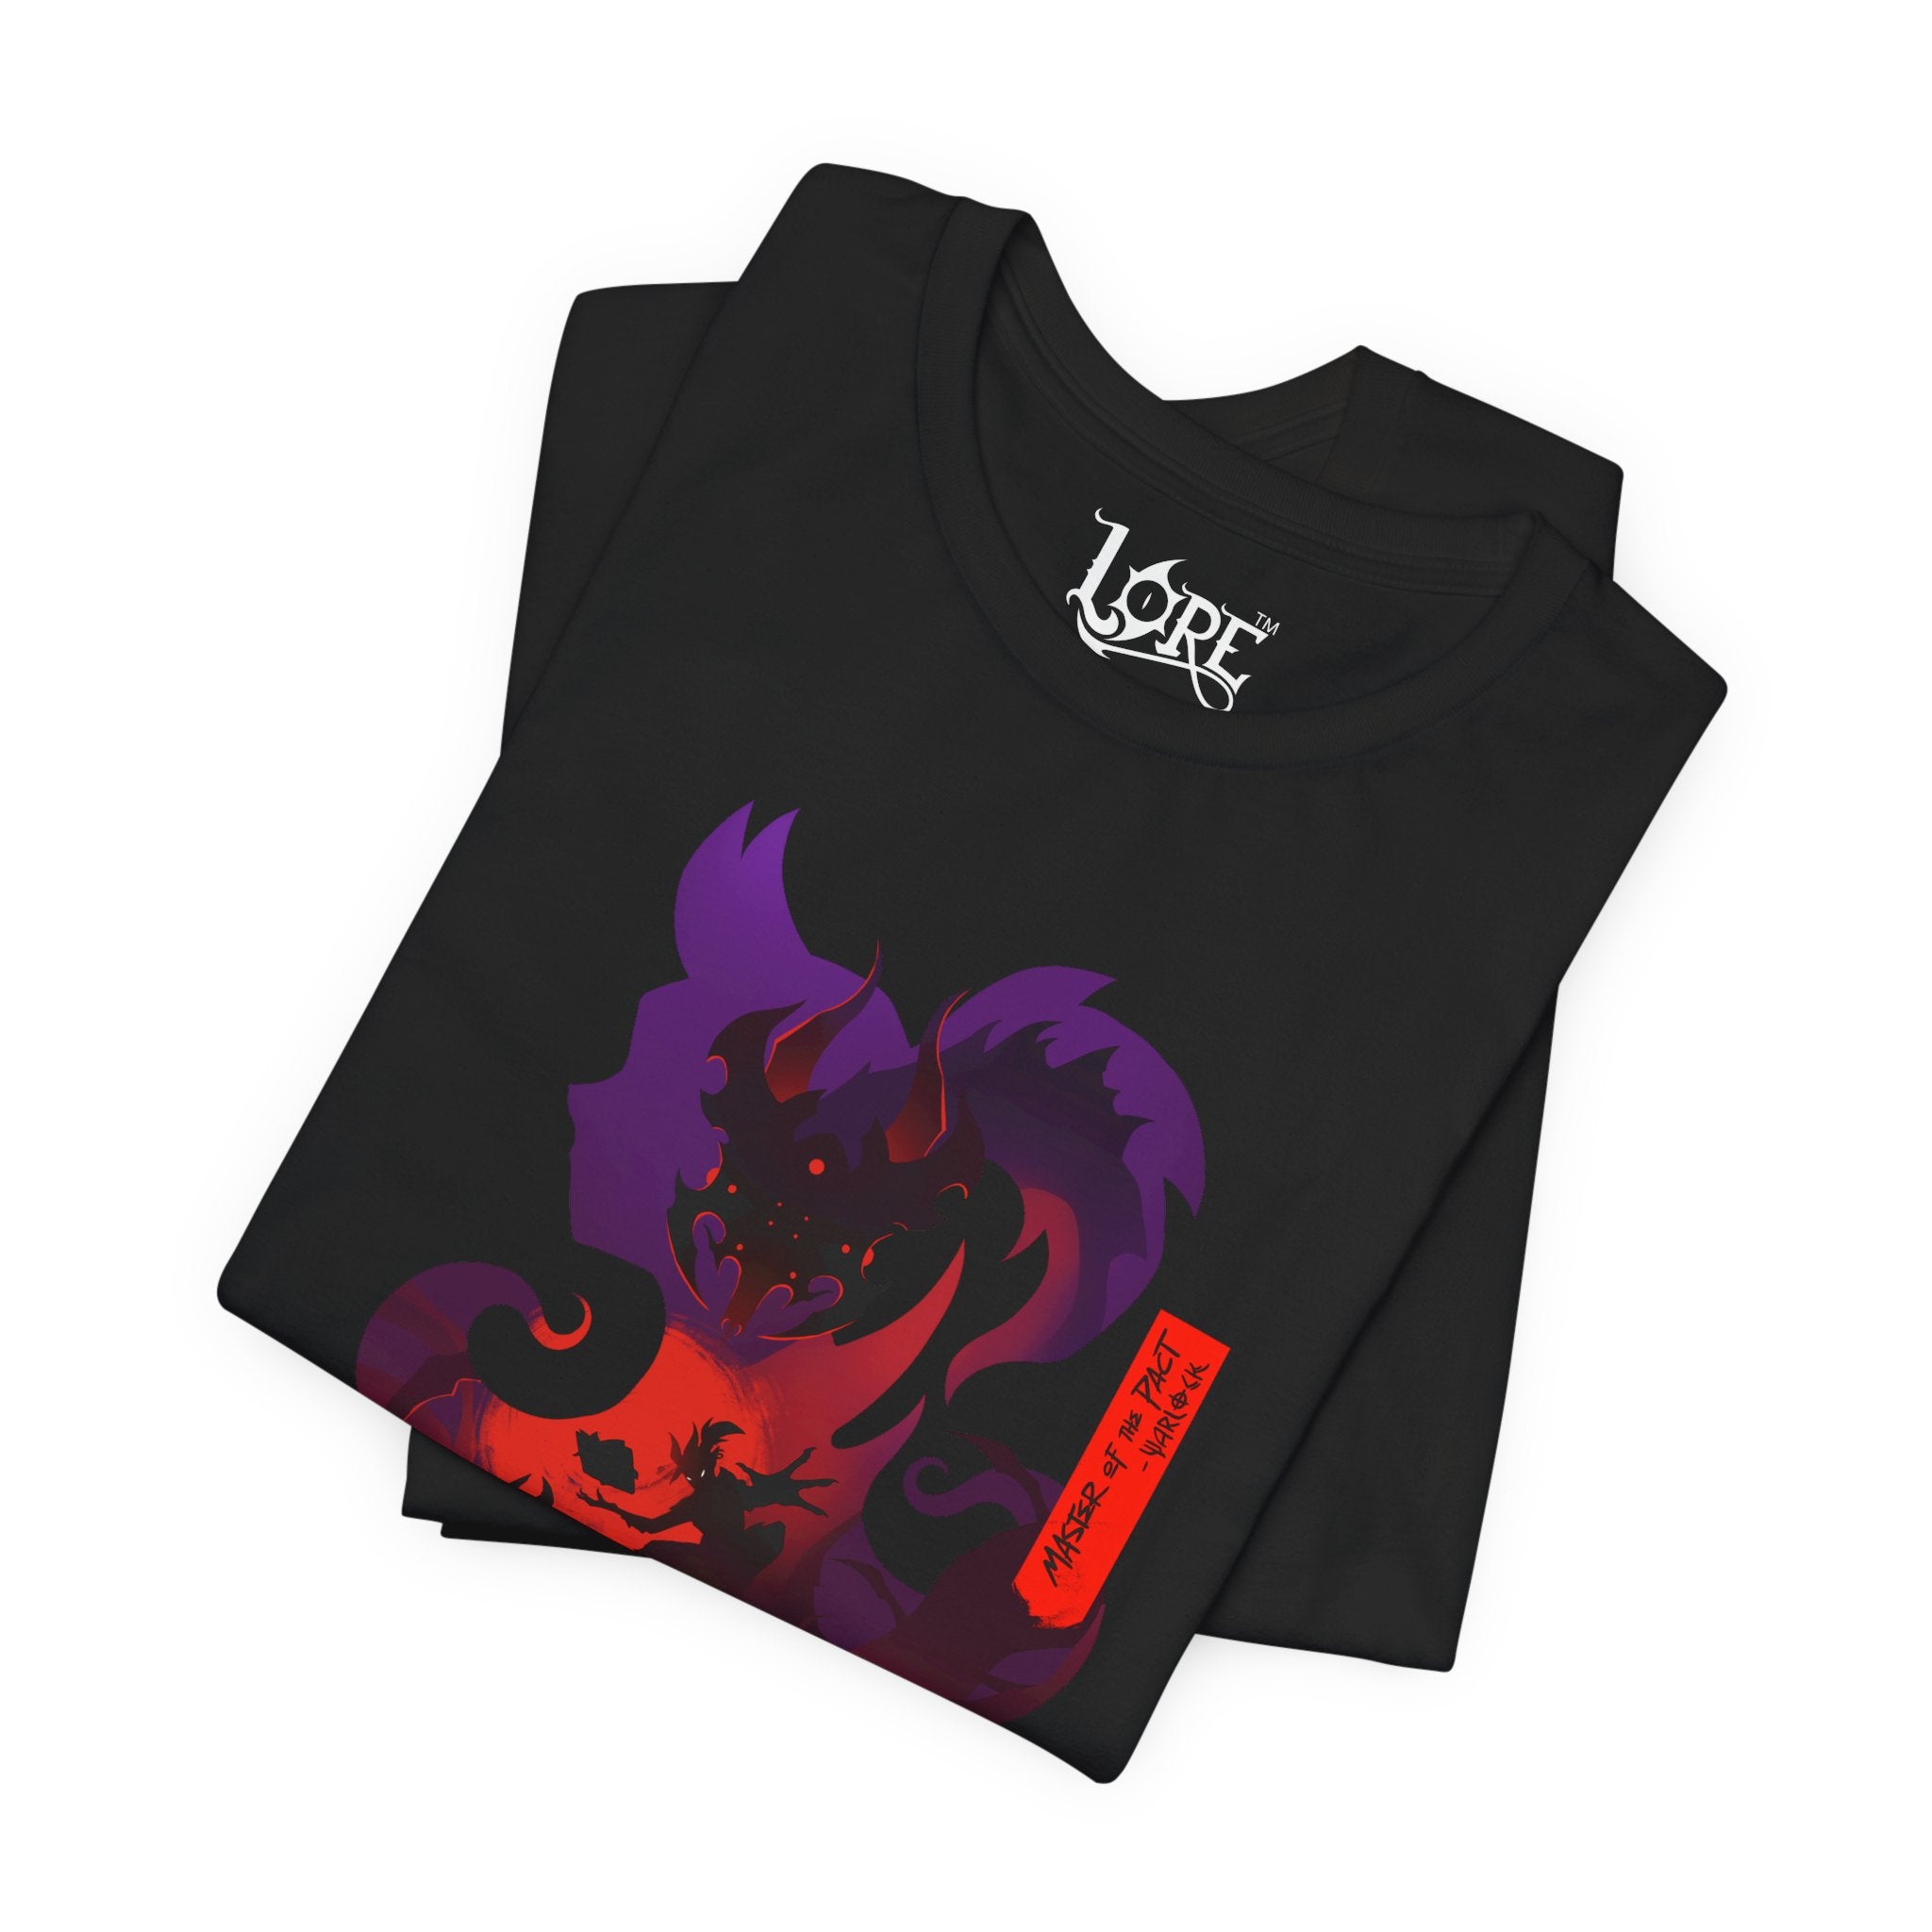 WARLOCK CLASS SILHOUETTE T-SHIRT - RED BANNER EDITION